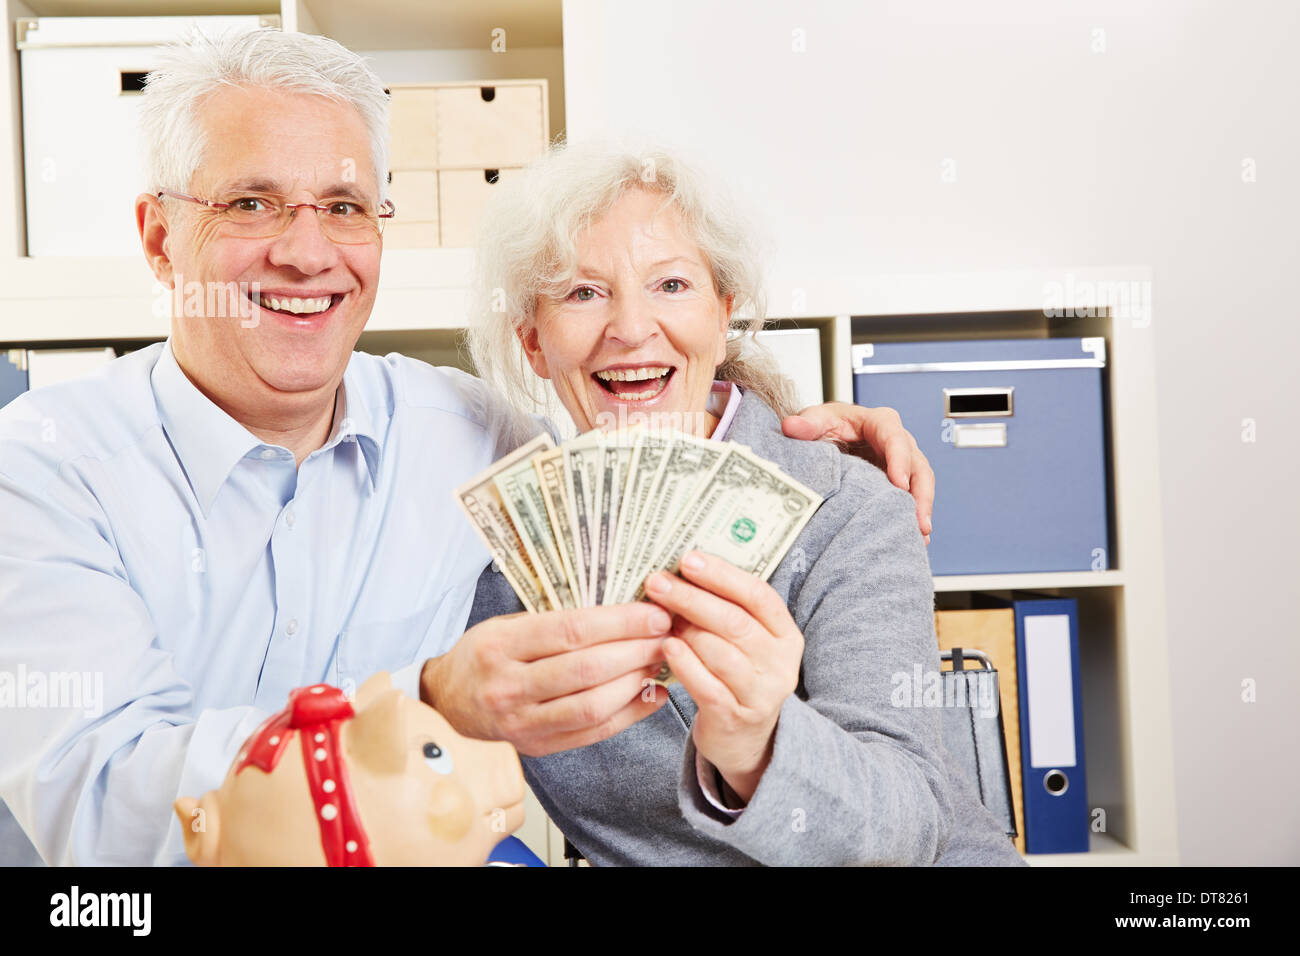 Happy senior couple with fan of dollar bills and a piggy bank Stock Photo